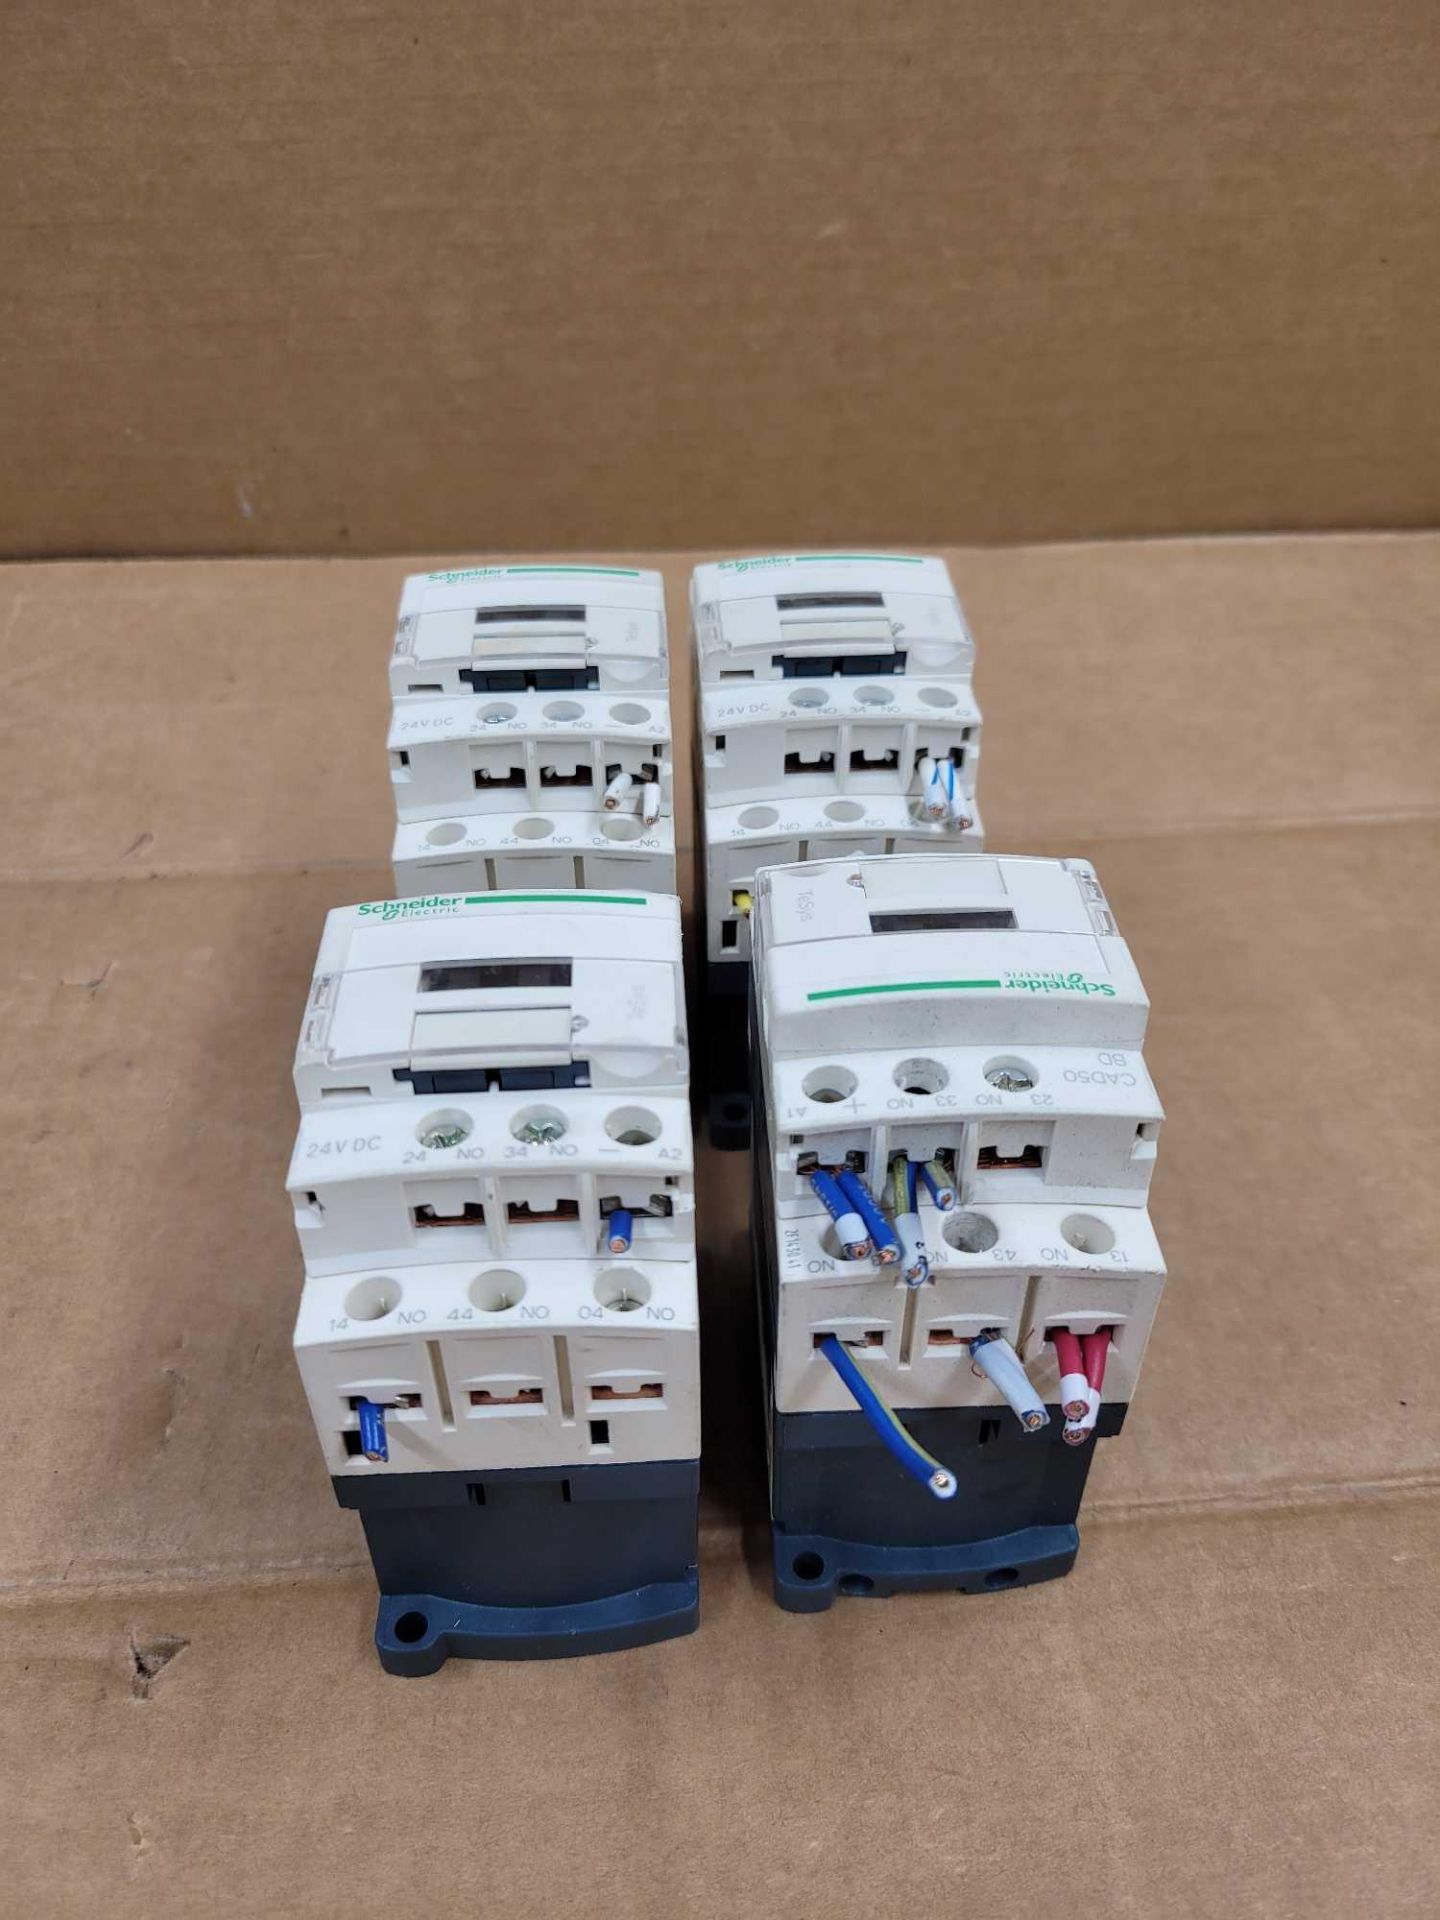 LOT OF 4 SCHNEIDER ELECTRIC CAD50BD with LAD4TBDL / Control Relay with Suppressor Block  /  Lot Weig